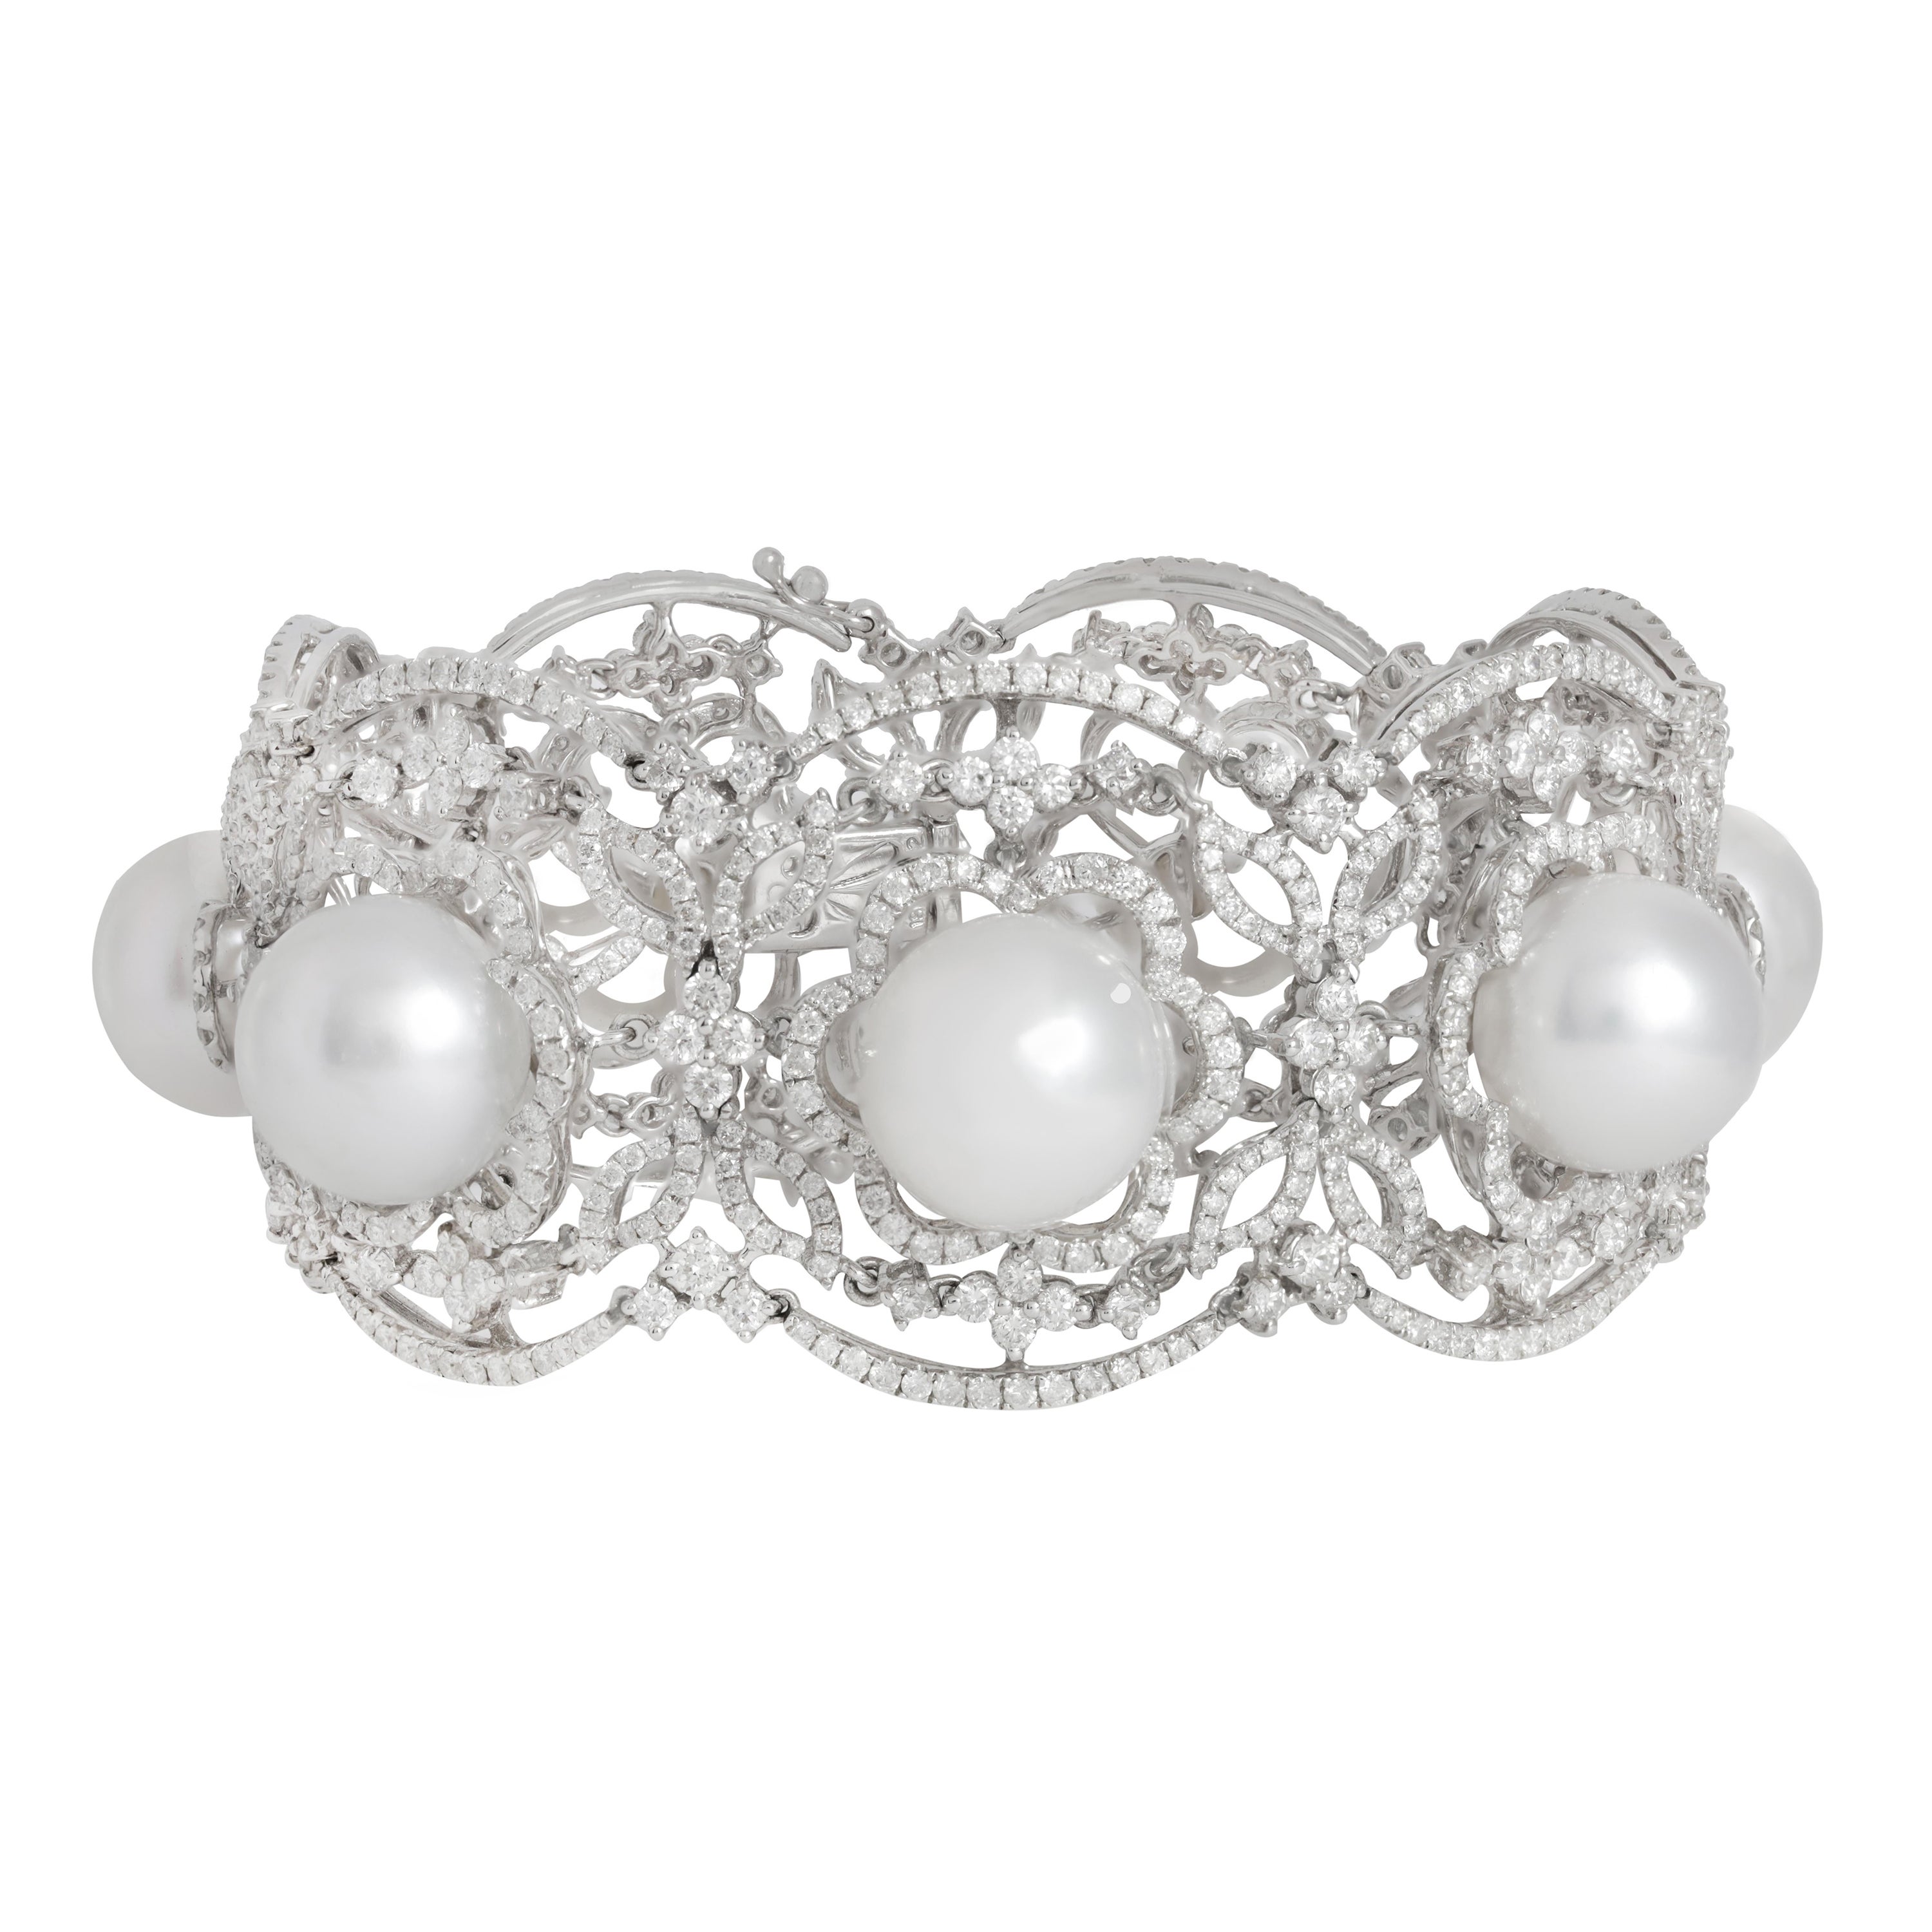 Diana M. 18 kt white gold diamond and pearl fashion bracelet adorned with 13.5  For Sale